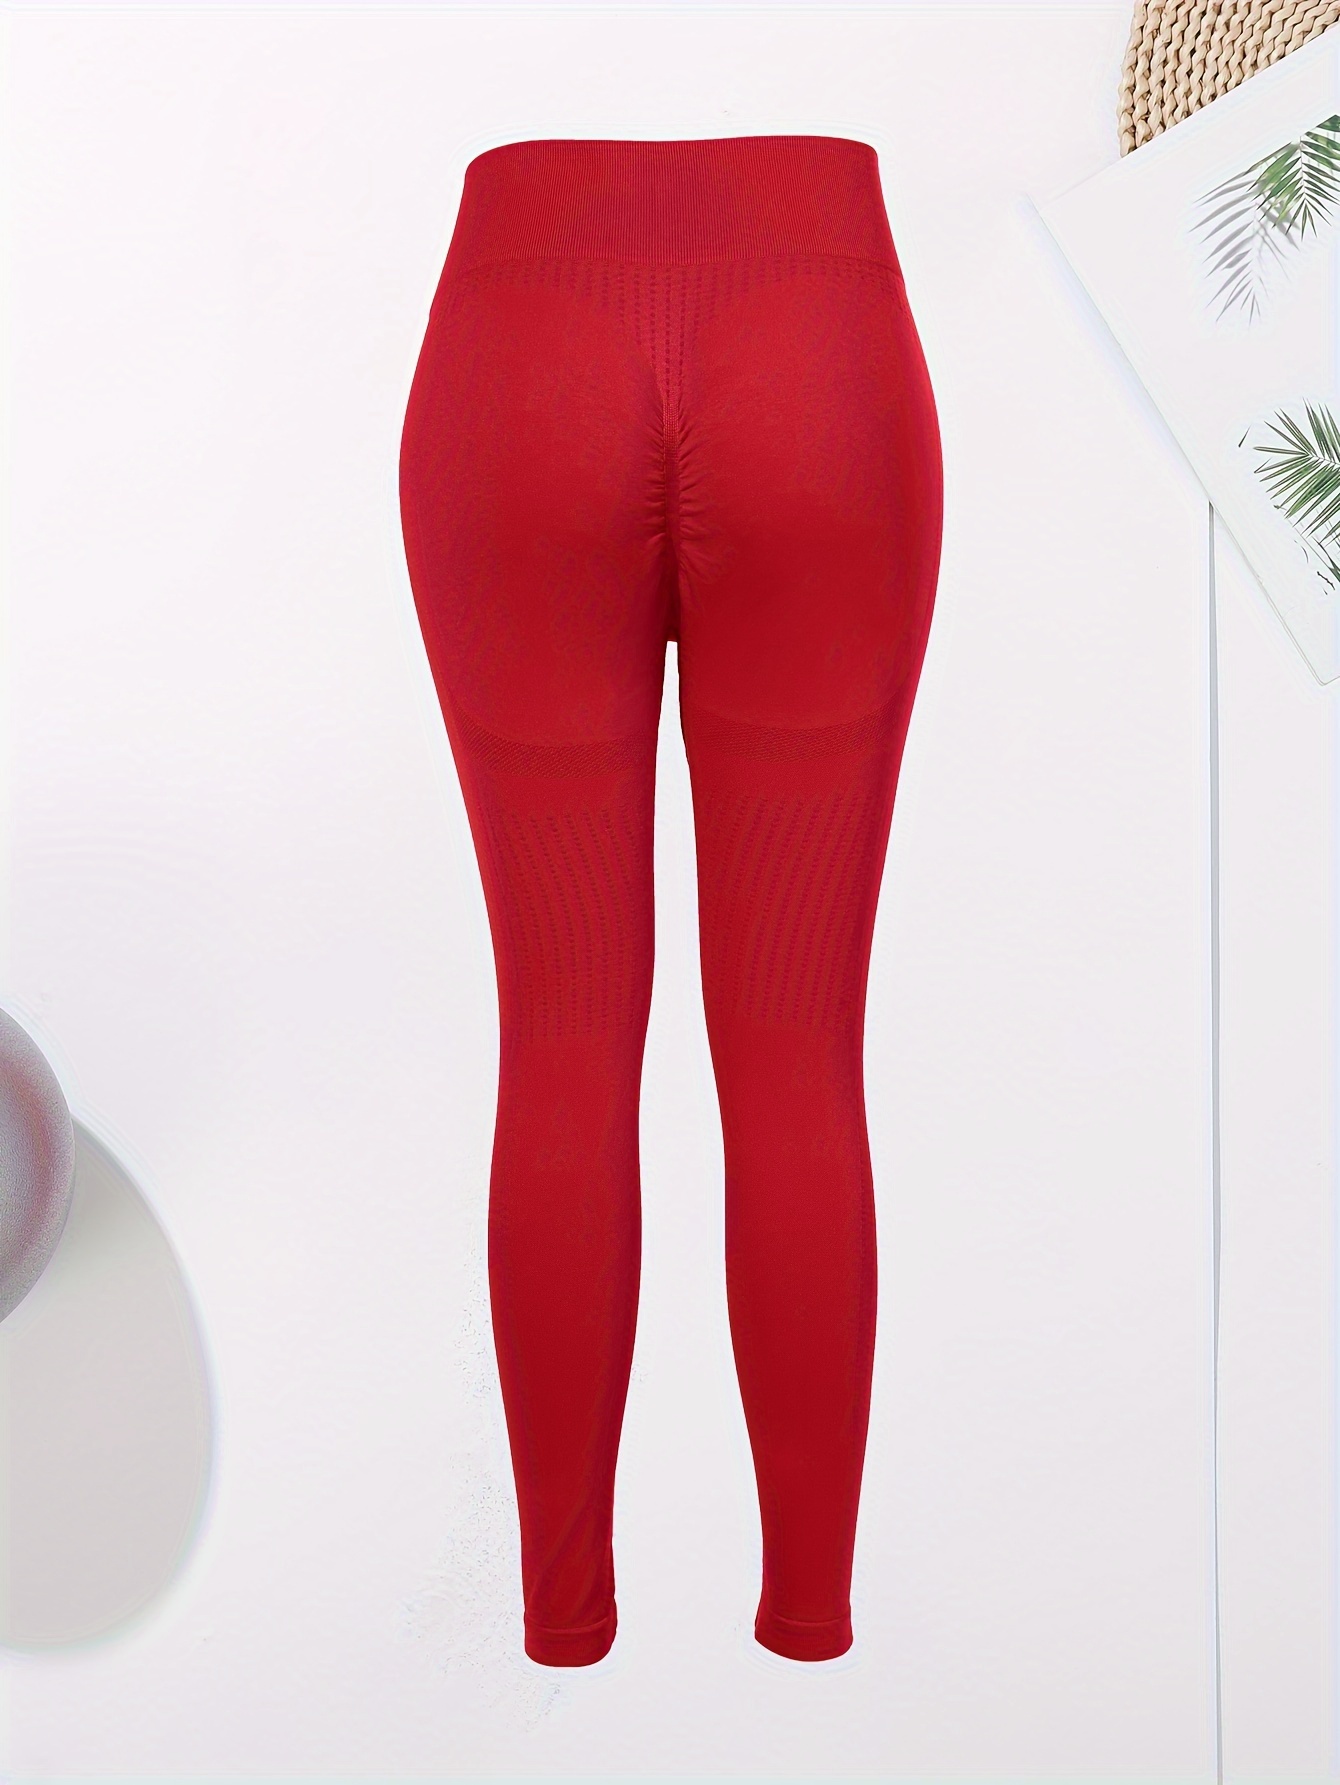 Red Striped Workout Leggings, Ladies Winter Activewear, High Waisted Yoga  Pants, Womens Exercise Clothing, Thick Cotton Leggings, Leggings 